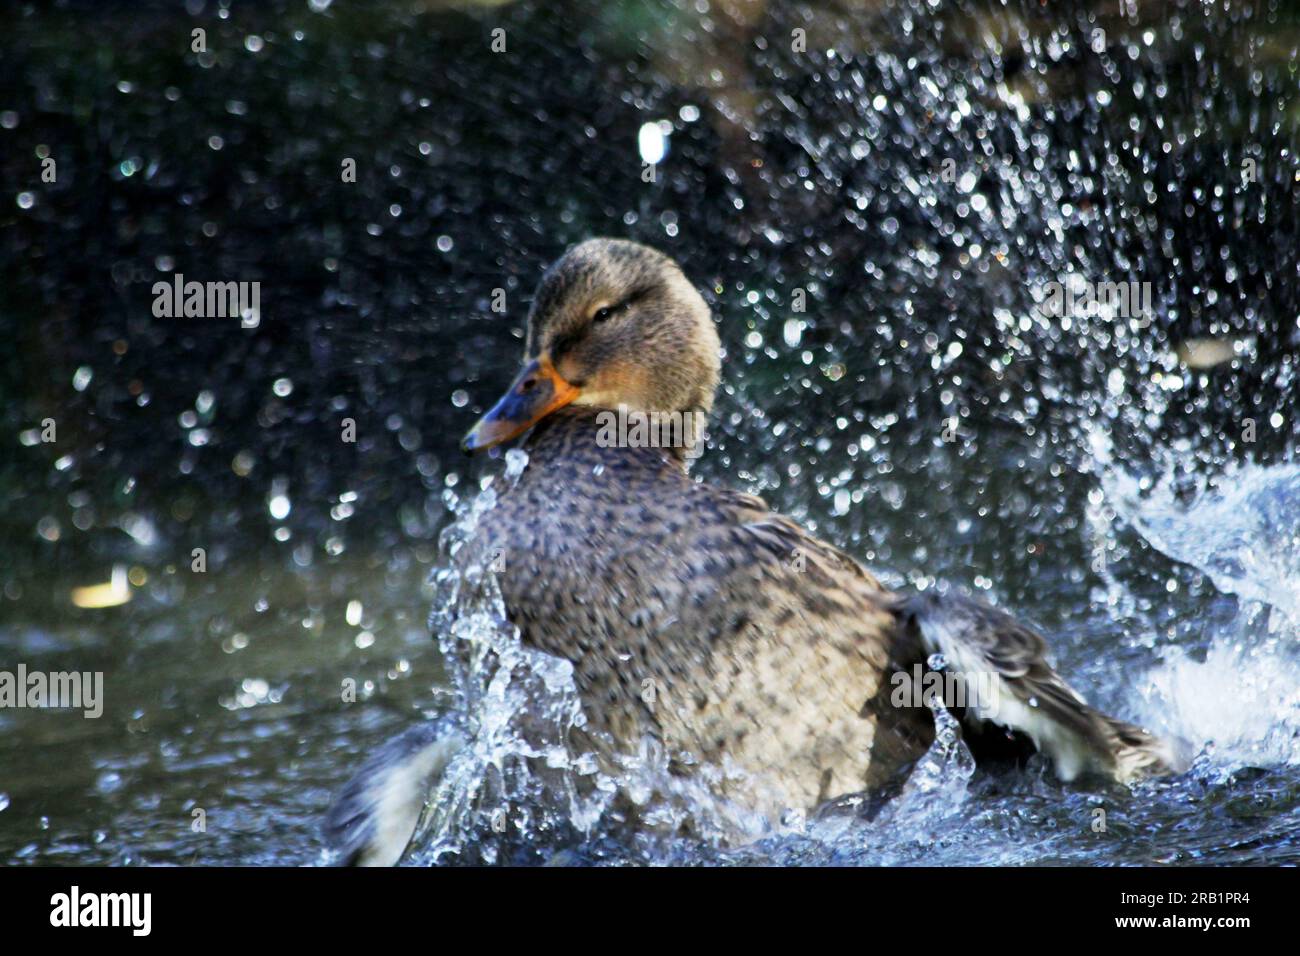 A duck is splashing in the water. Stock Photo